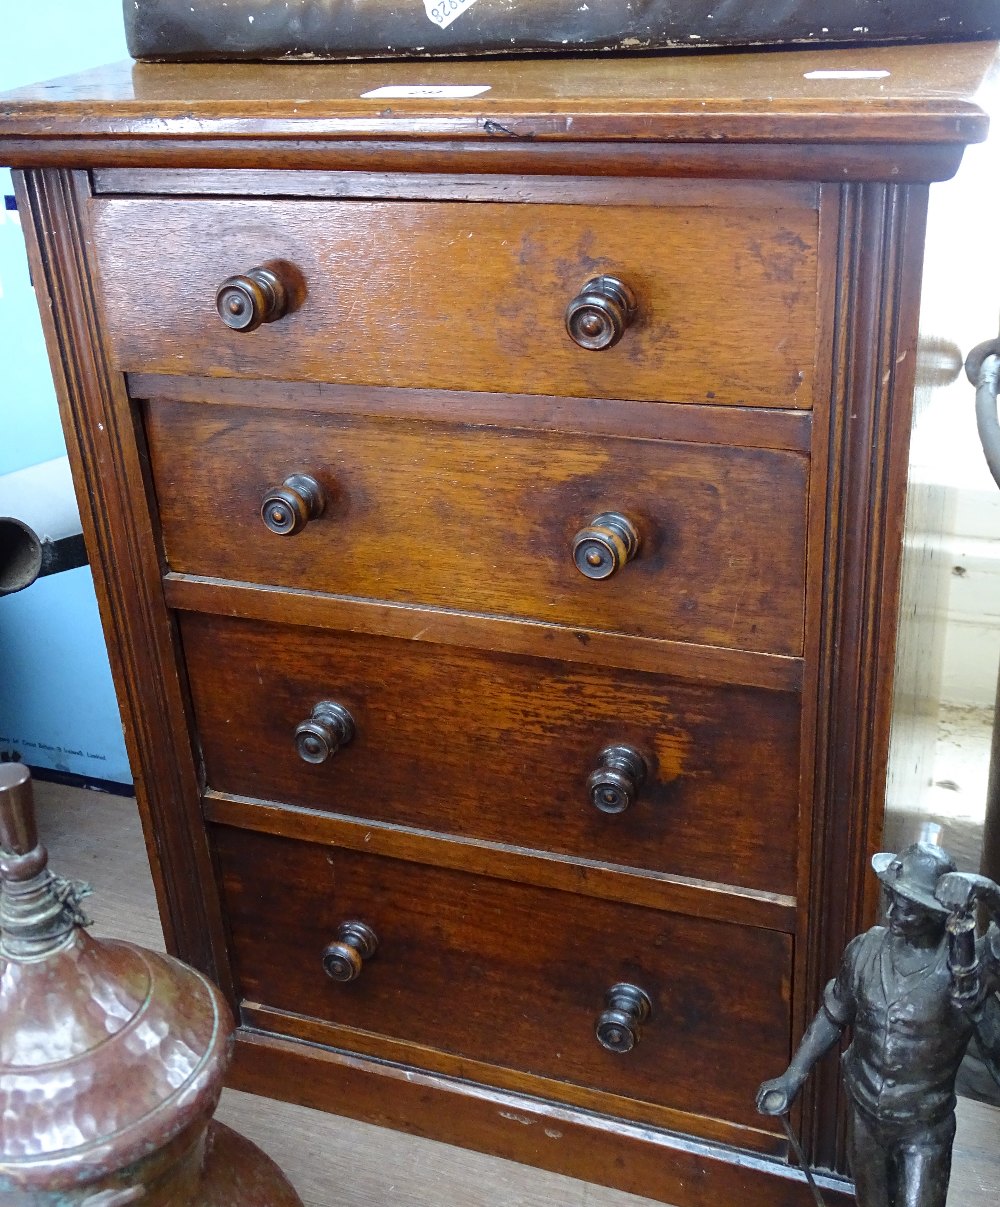 A Victorian walnut table-top chest of 4 drawers, height 18", width 13.5"